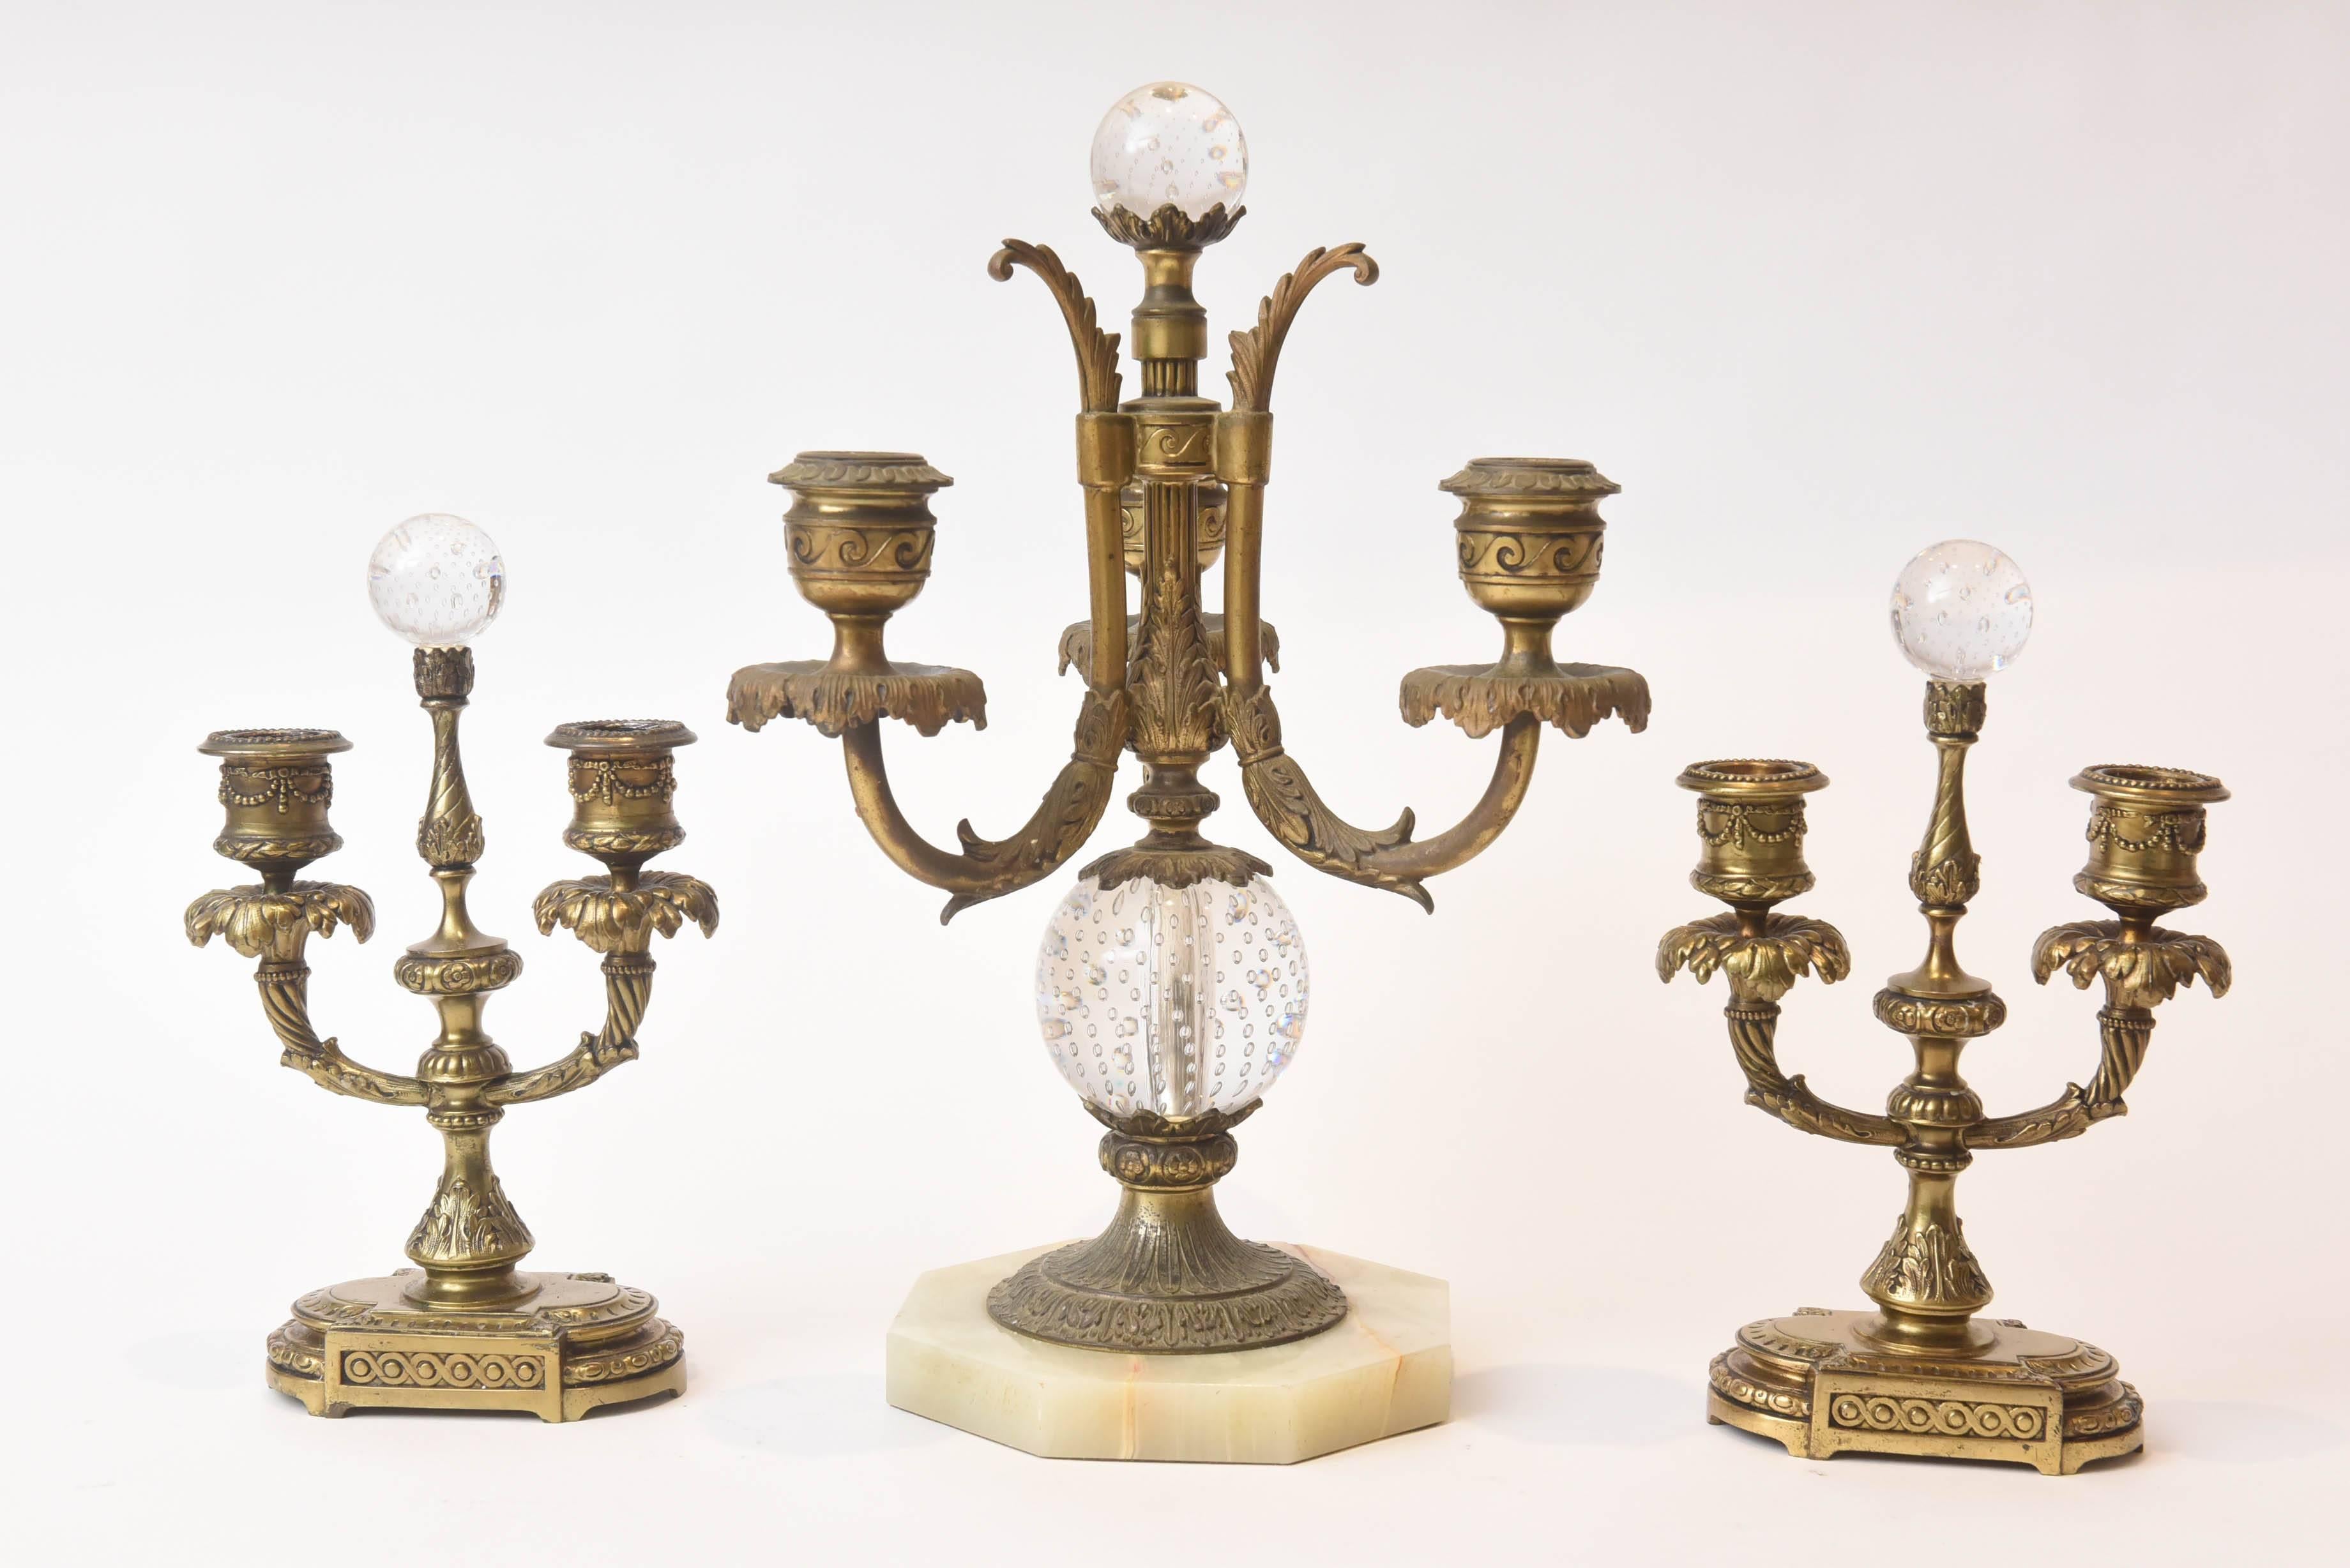 Elaborate Gilt Metal And Crystal Three-Piece Table Top Centerpiece Set 2